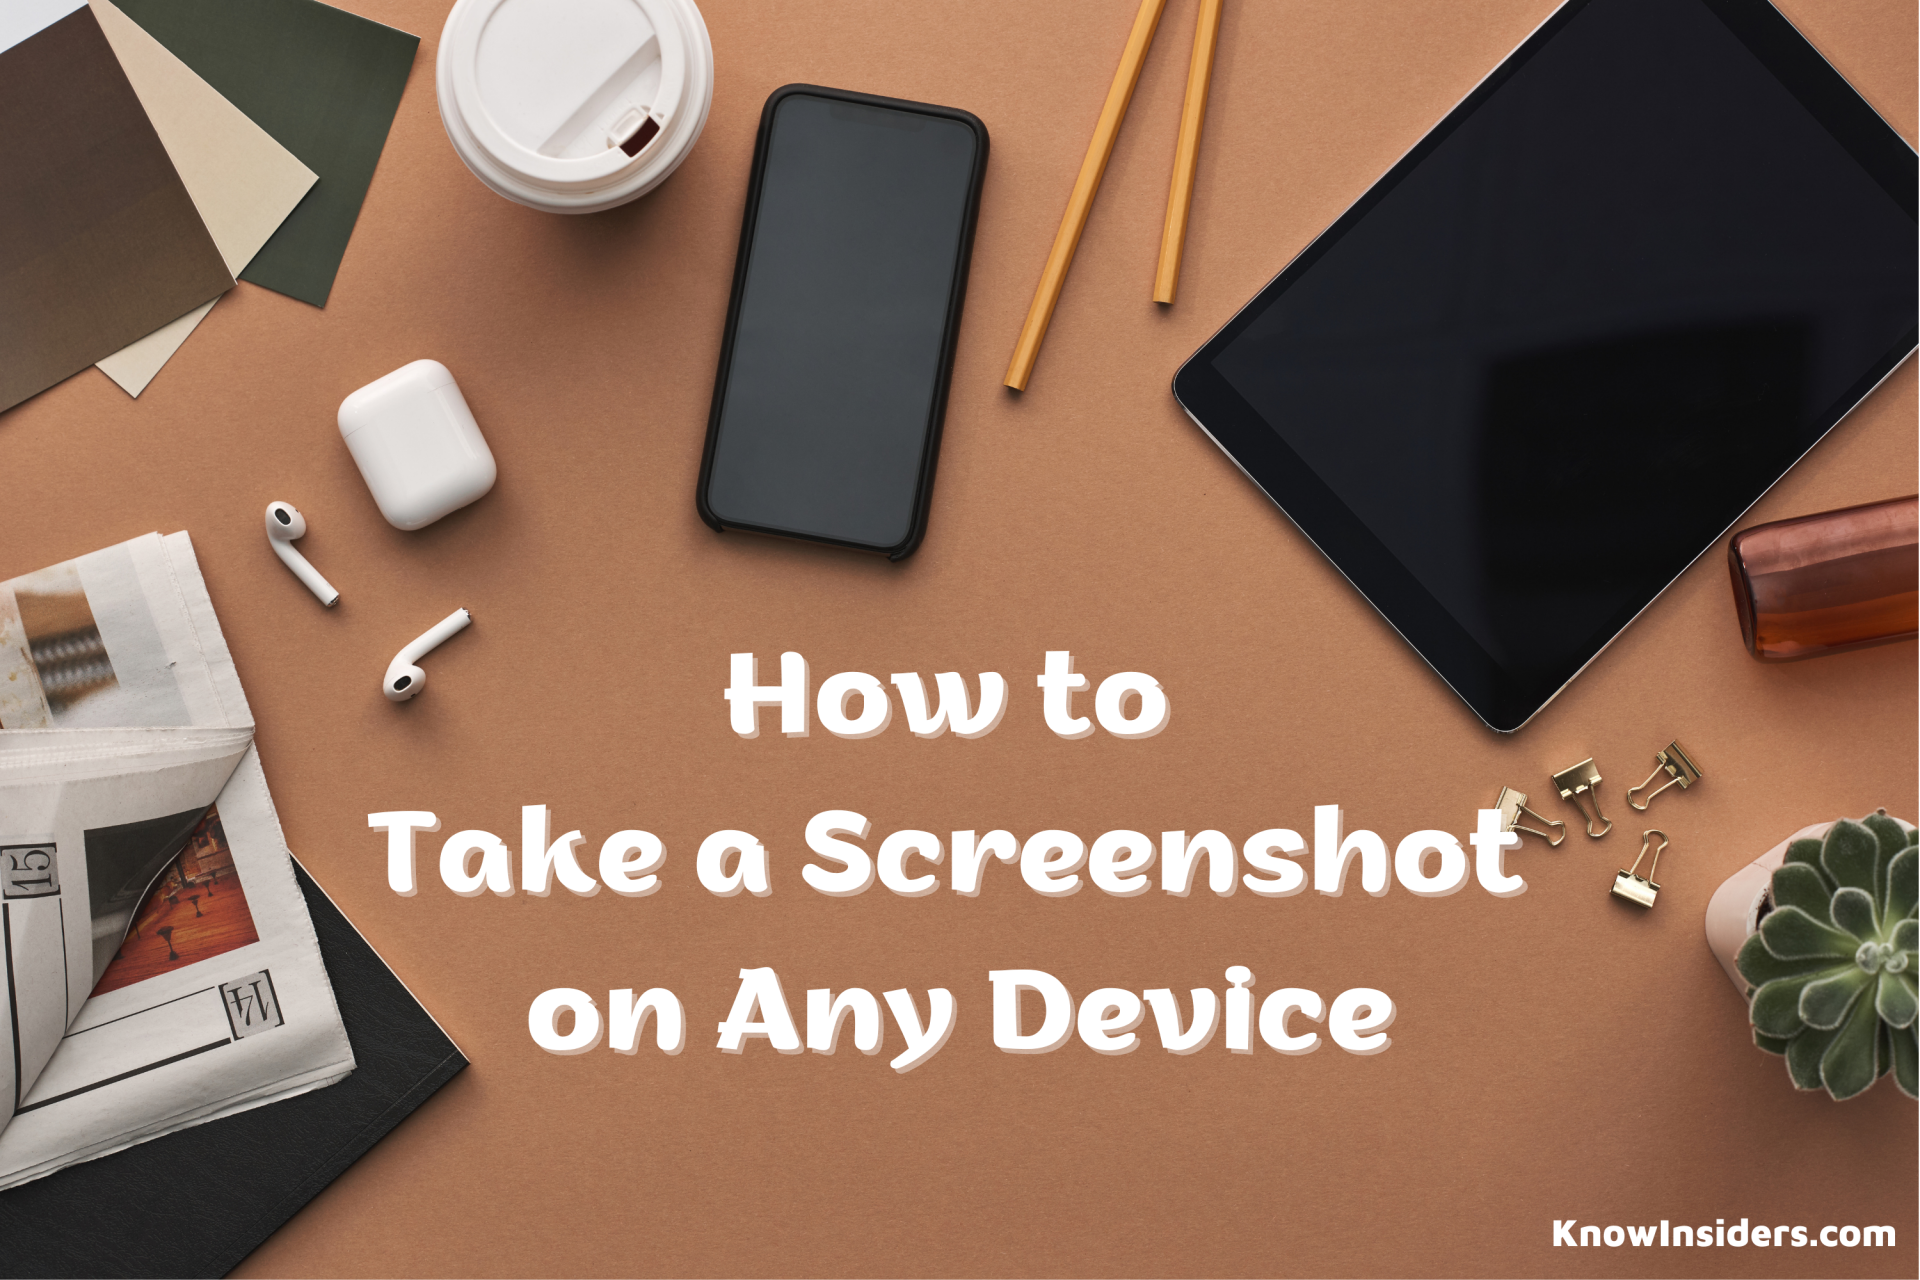 How to Take Screenshot on Any Device: Laptop, PC, Phone or Tablet